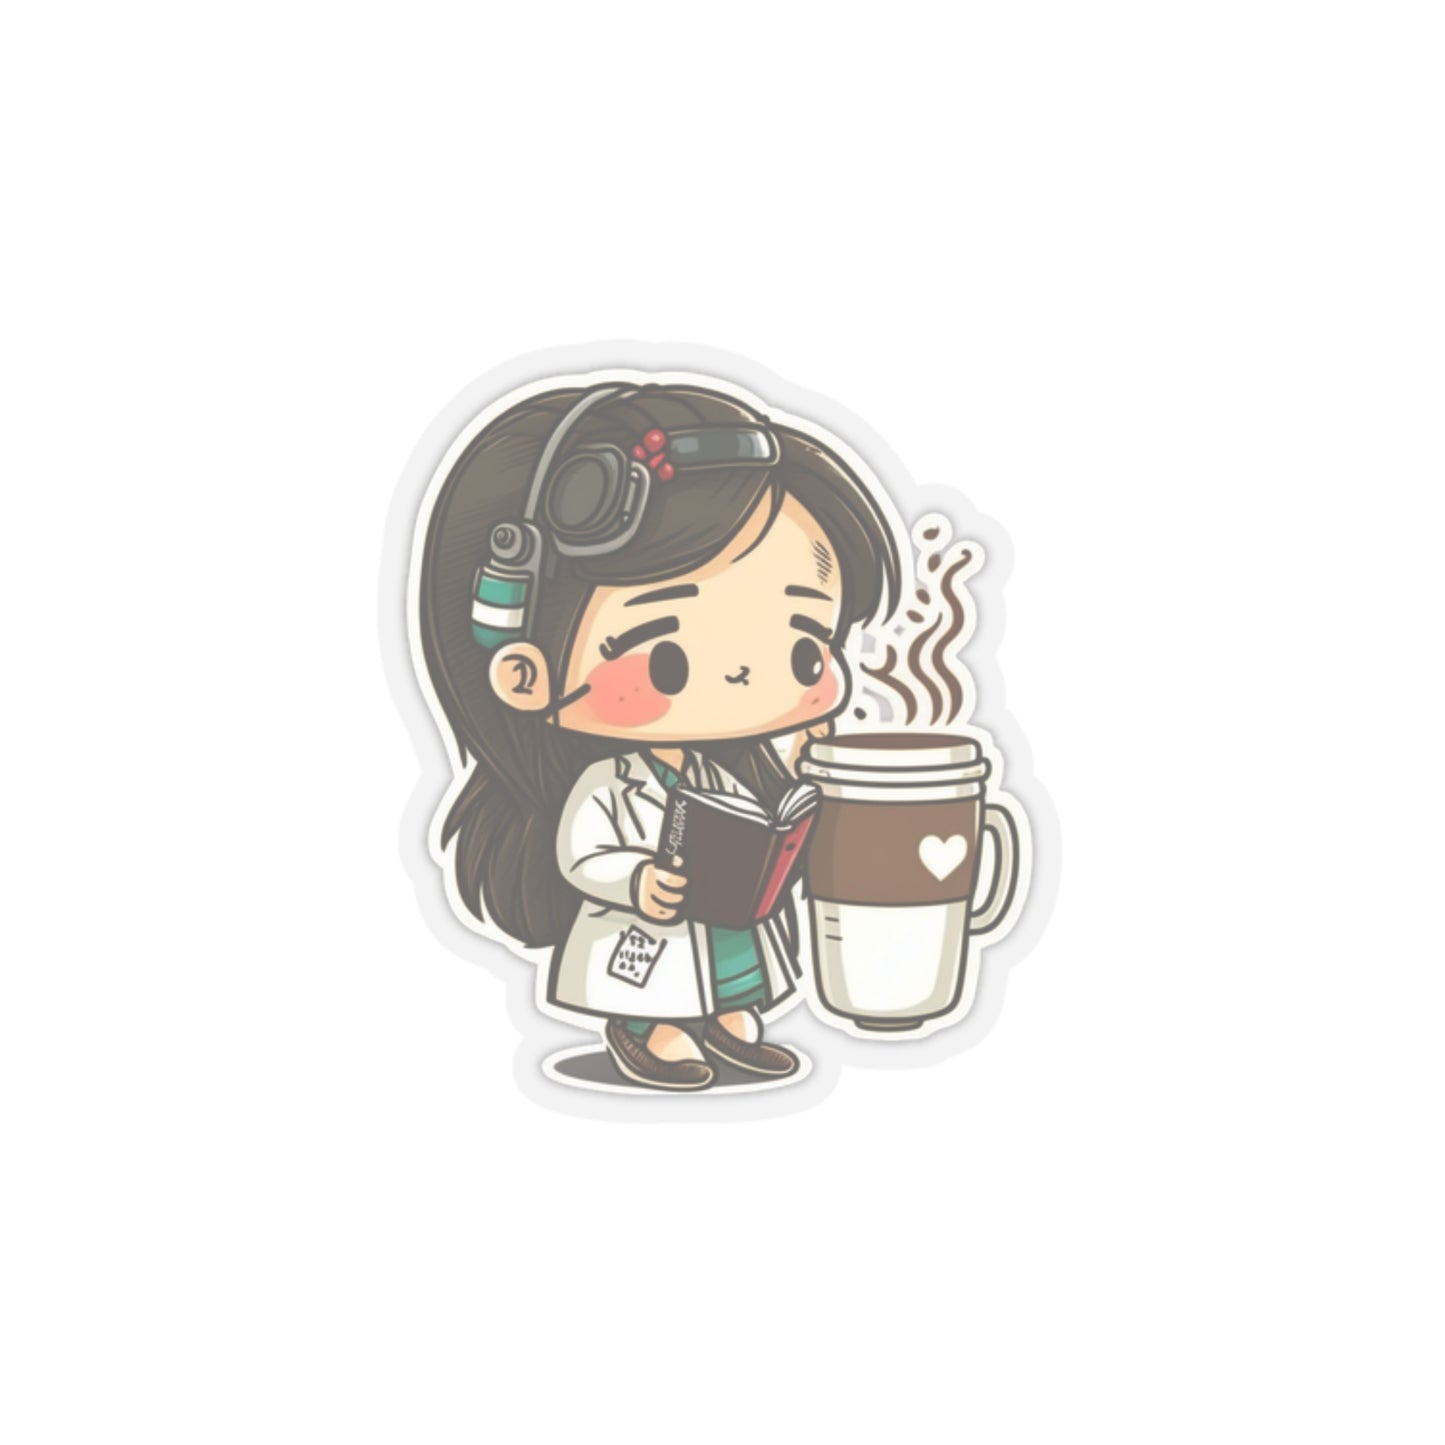 Caring and Caffeinated: The Adorable Physician Sticker!